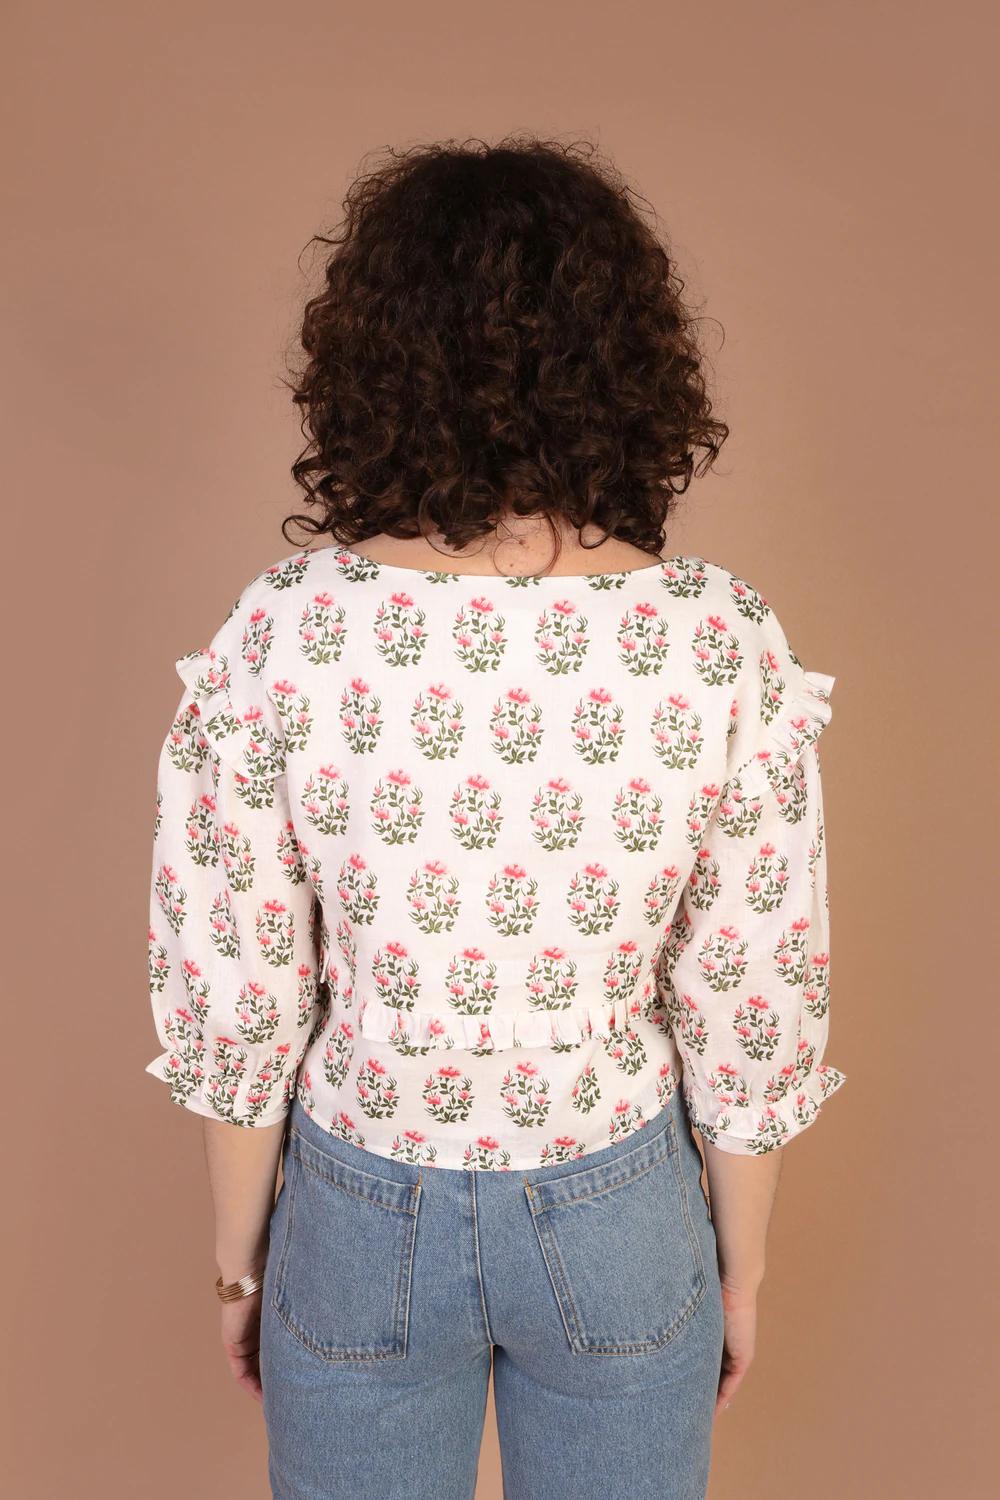 Product Image for Daphne Top, Block Print Floral